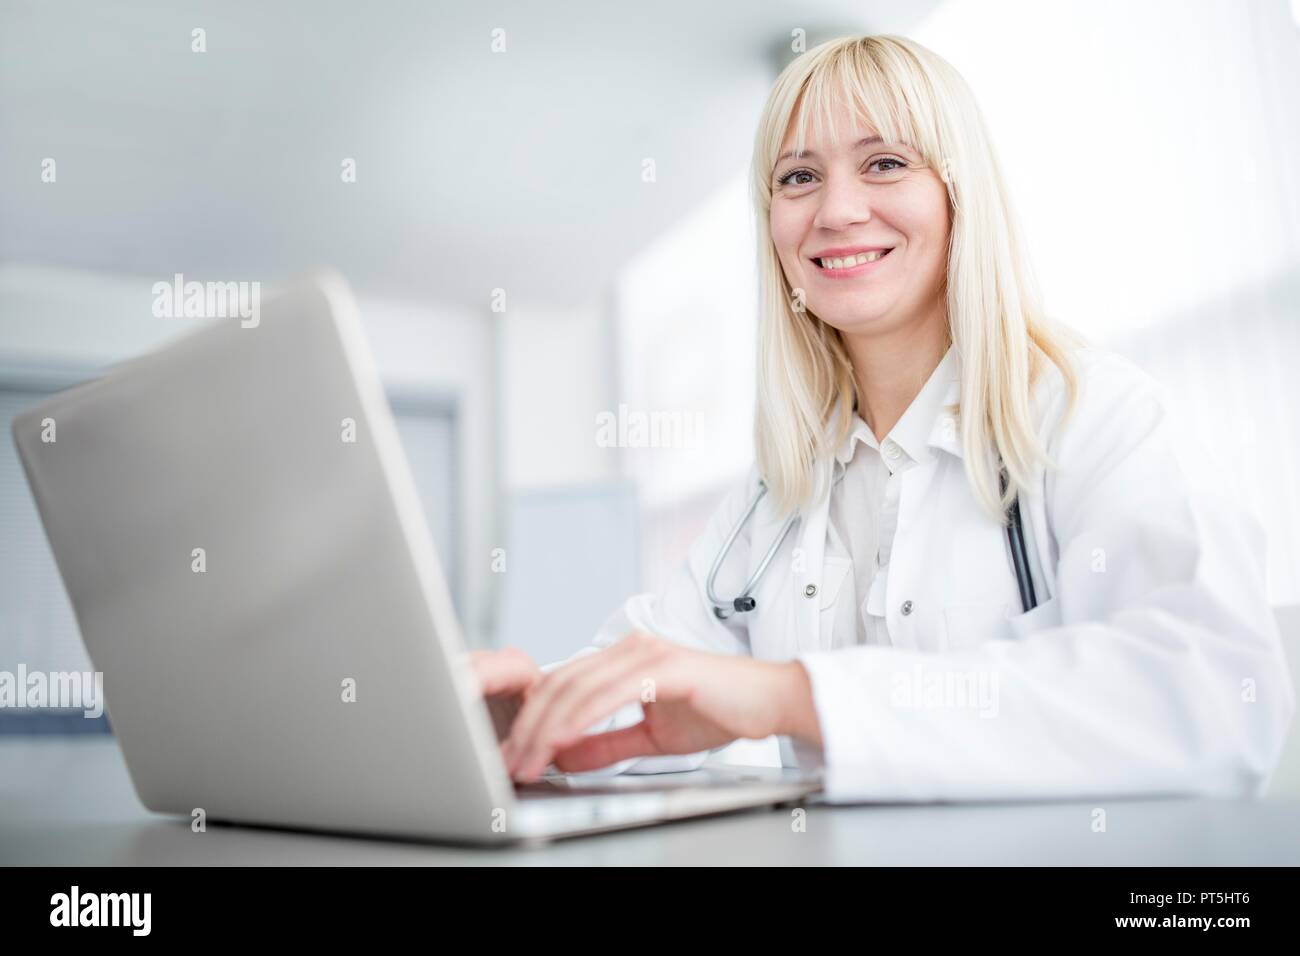 Female doctor using laptop and smiling. Stock Photo